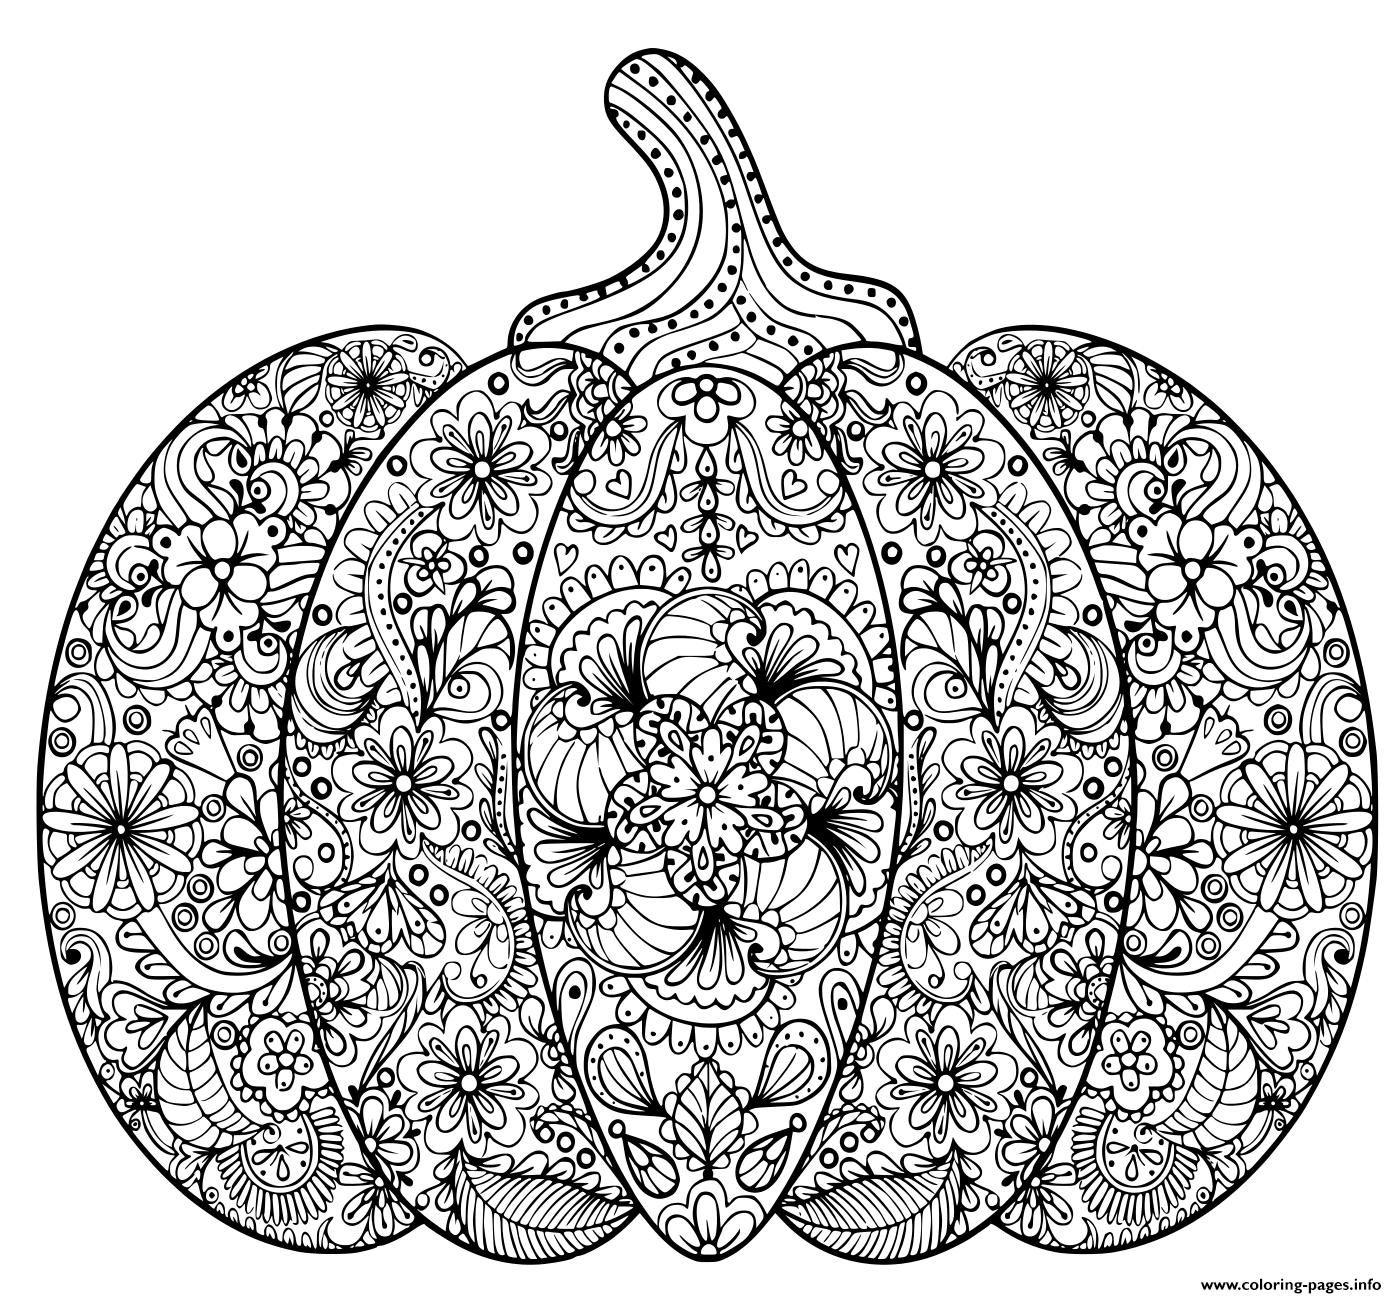 Pumpkin Illustration Hand Drawn Vegetable In Zentangle Style Tribal Totem For Tattoo Adult coloring